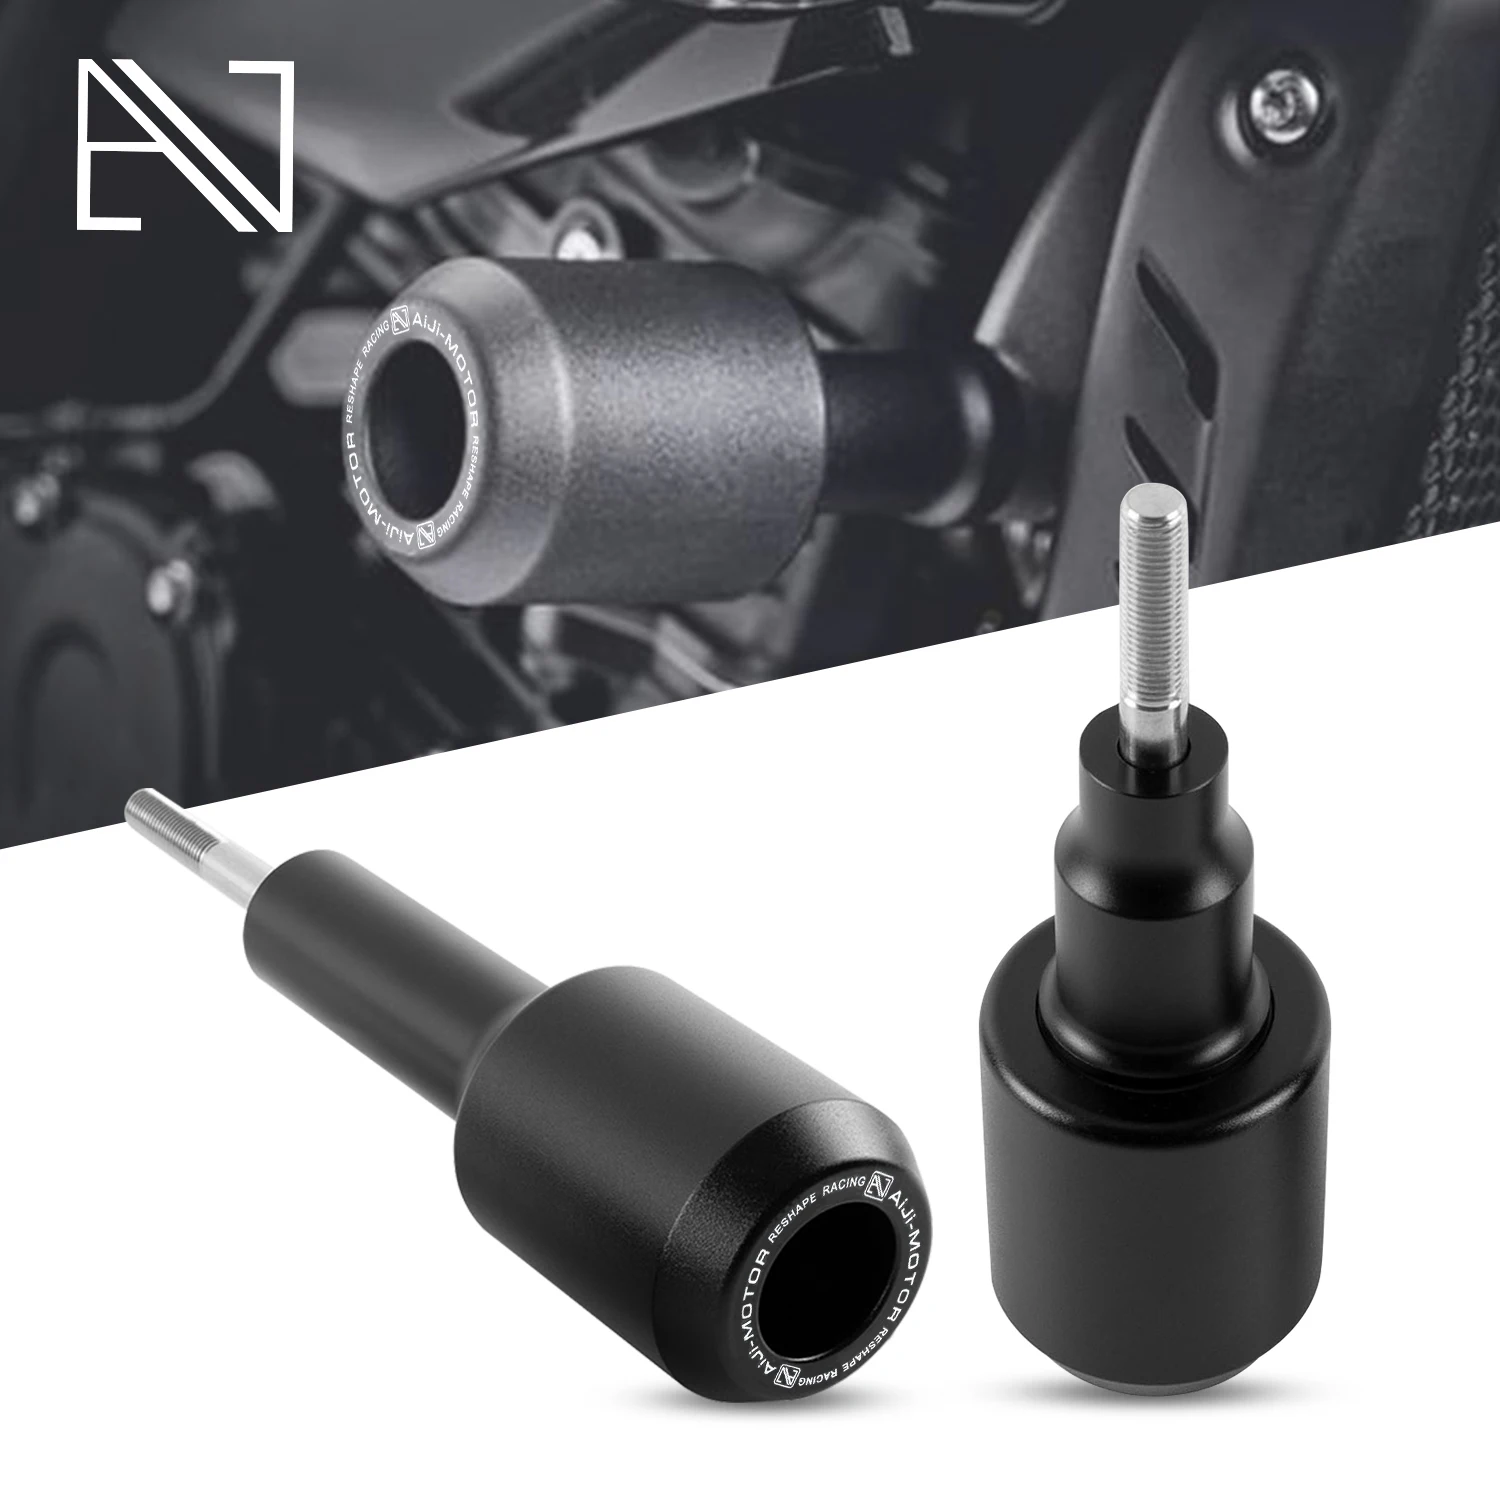 

Motorcycle Accessories Frame Sliders Crash Protector For StreetTriple Street Triple RX S 765 R RS Falling Protection Pad